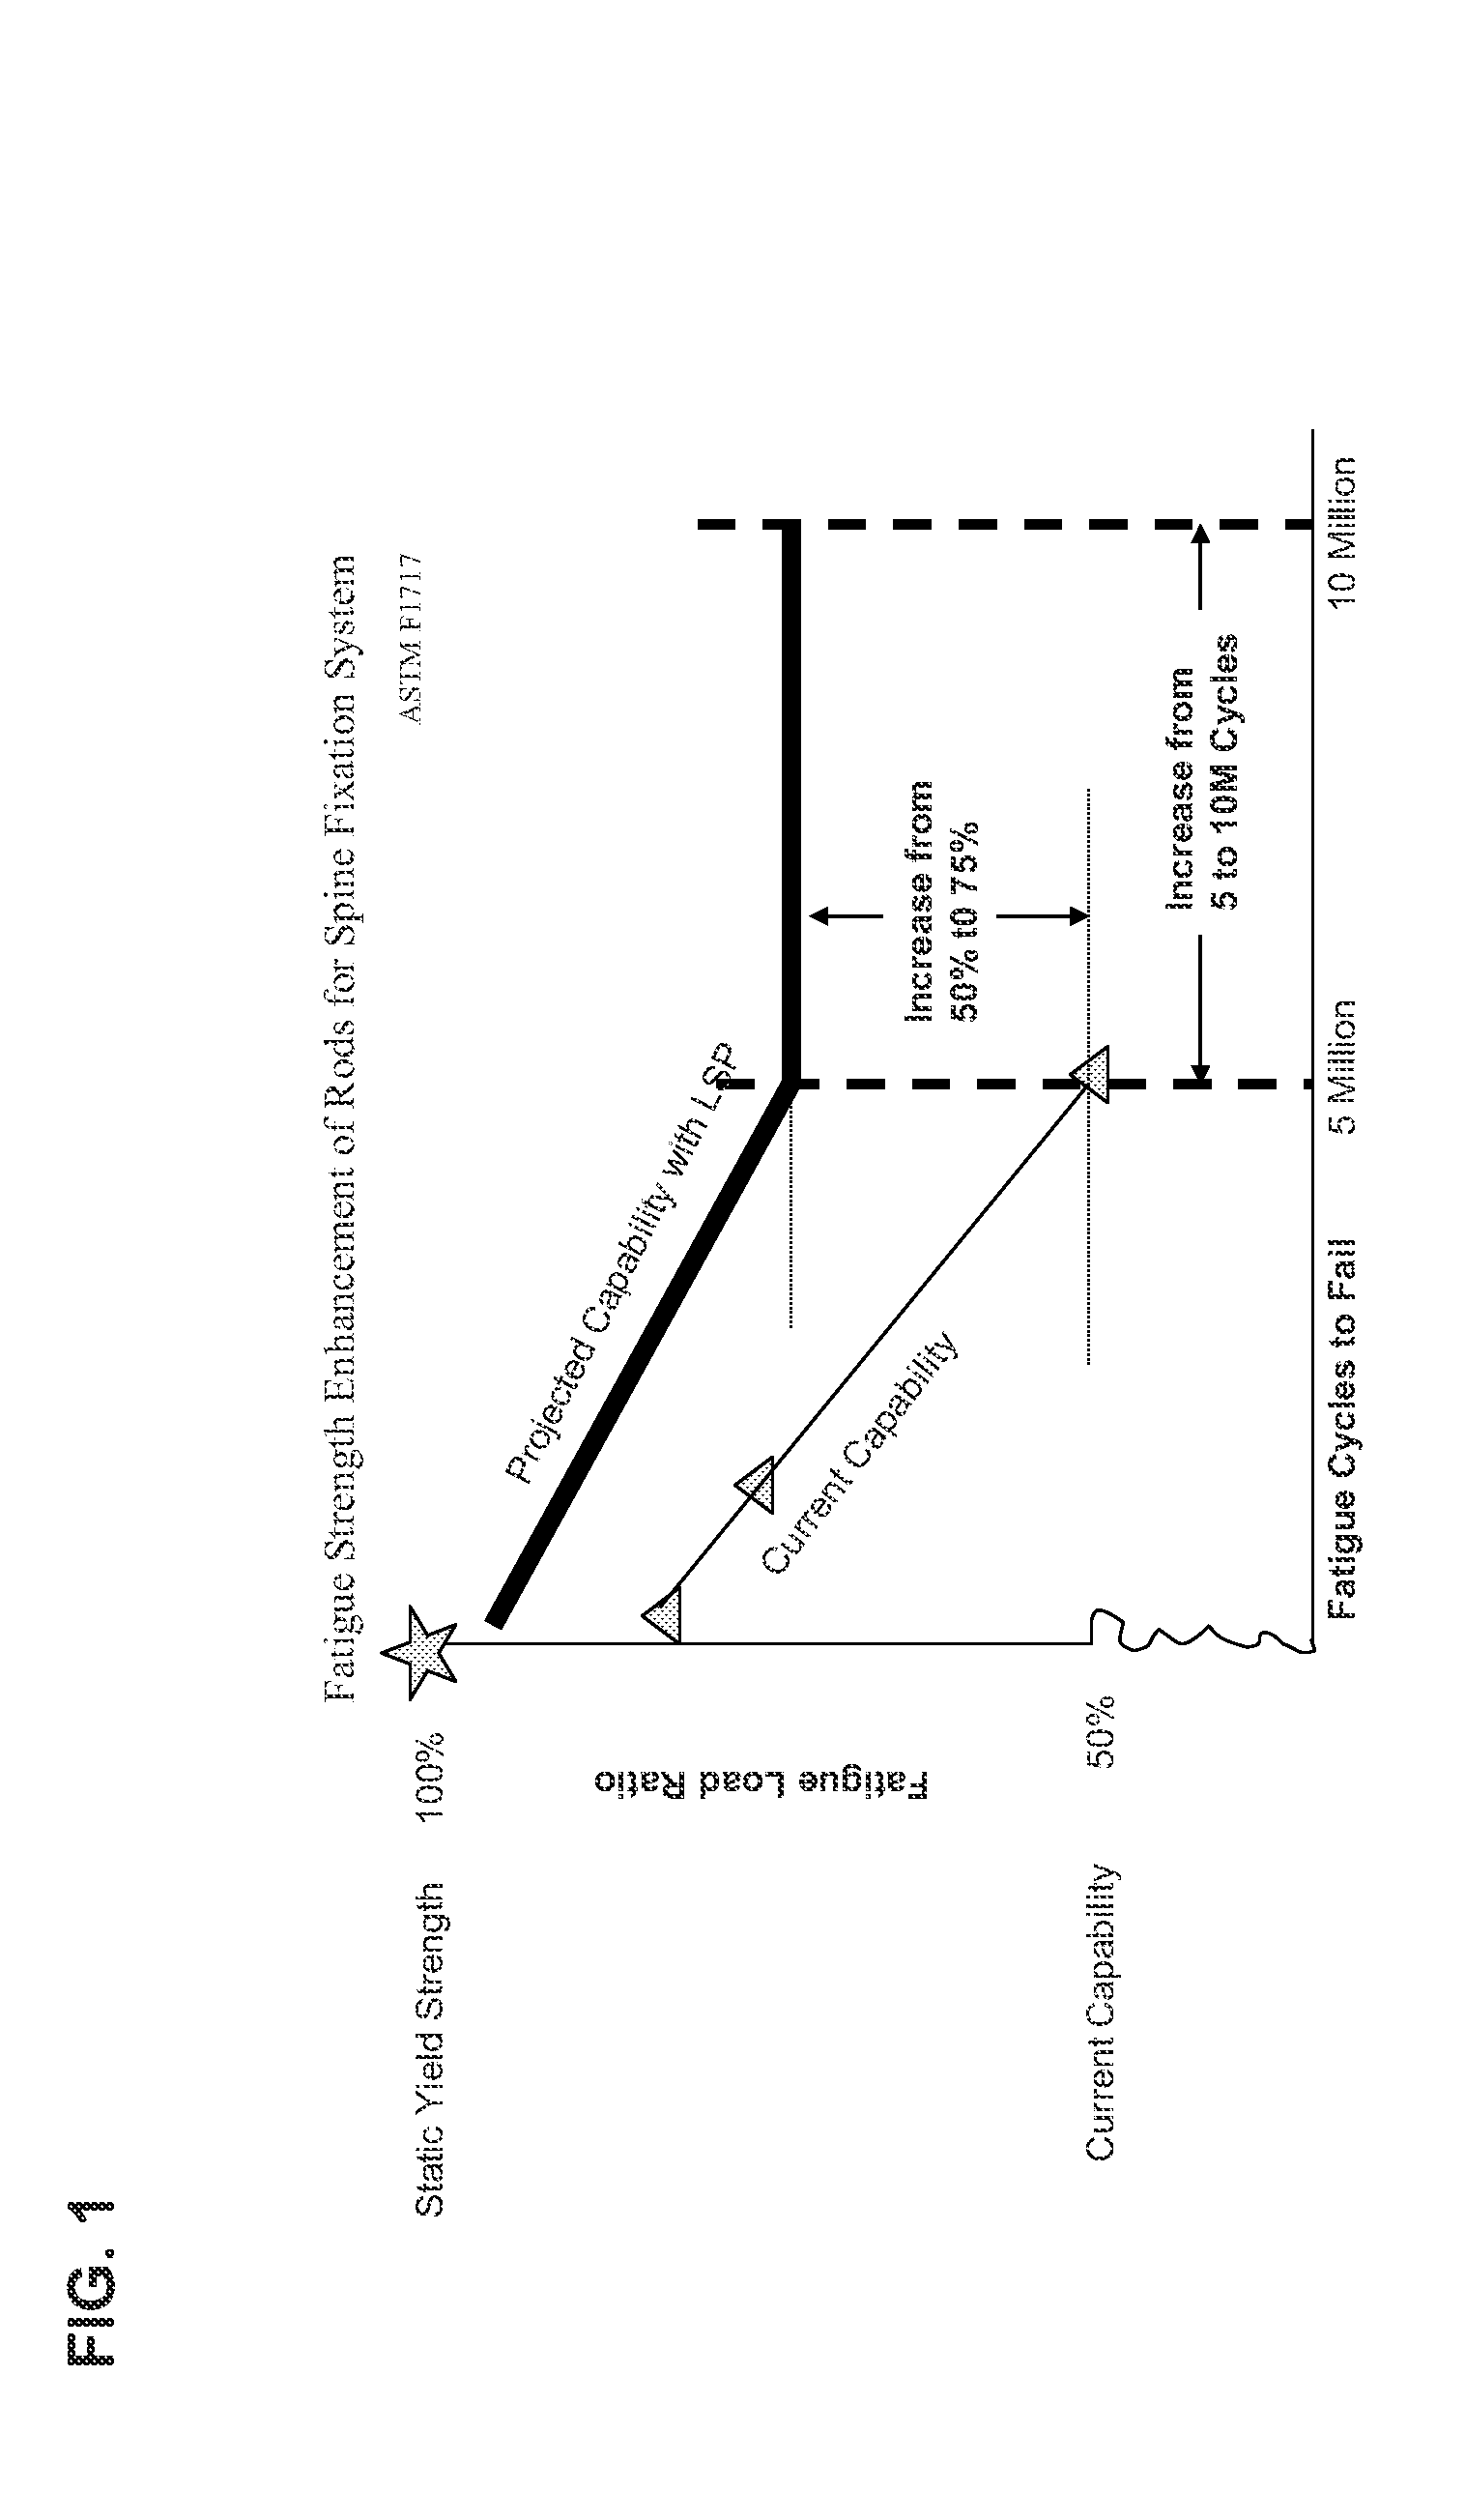 Implant and a system and method for processing, desiging and manufacturing an improved orthopedic implant